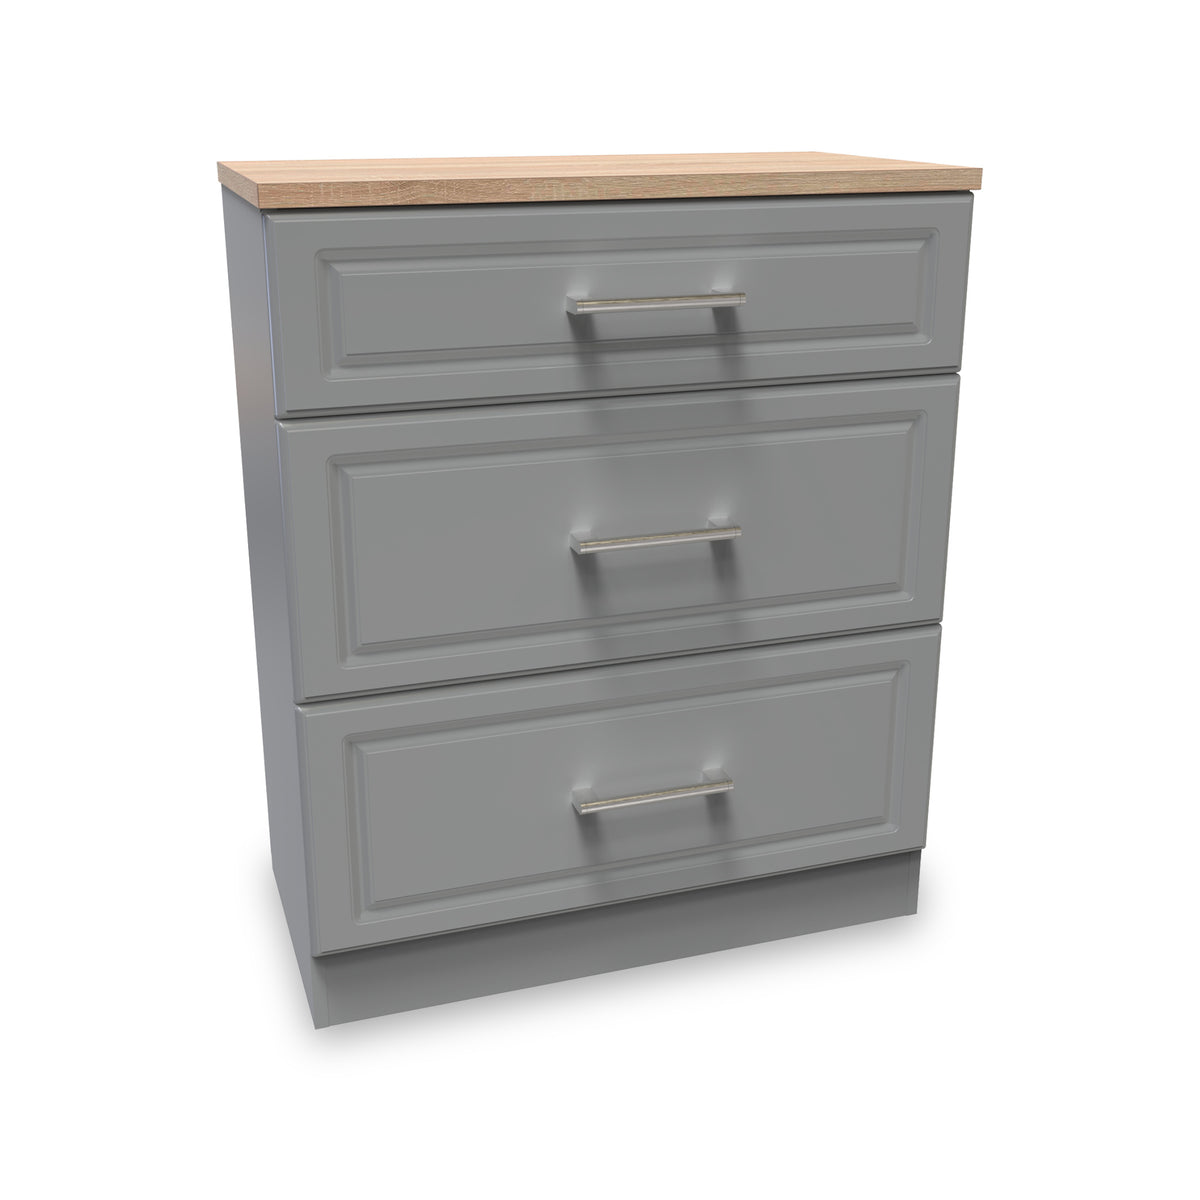 Talland Grey 3 Drawer Deep Chest by Roseland Furniture